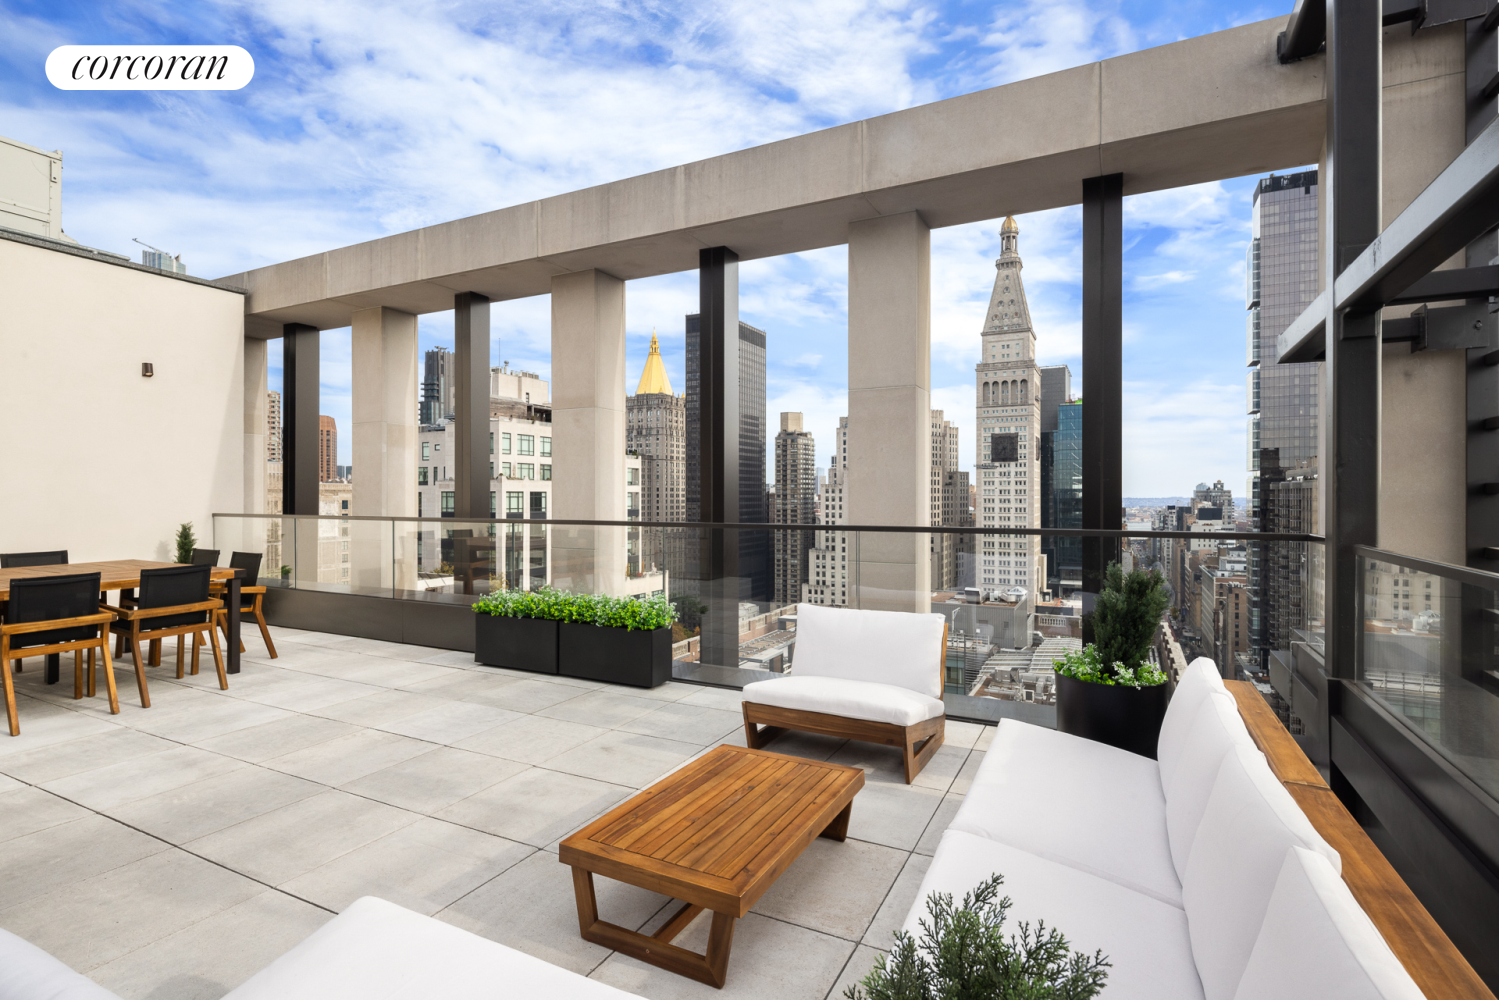 39 West 23rd Street Penthouse, Flatiron, Downtown, NYC - 3 Bedrooms  
3.5 Bathrooms  
8 Rooms - 